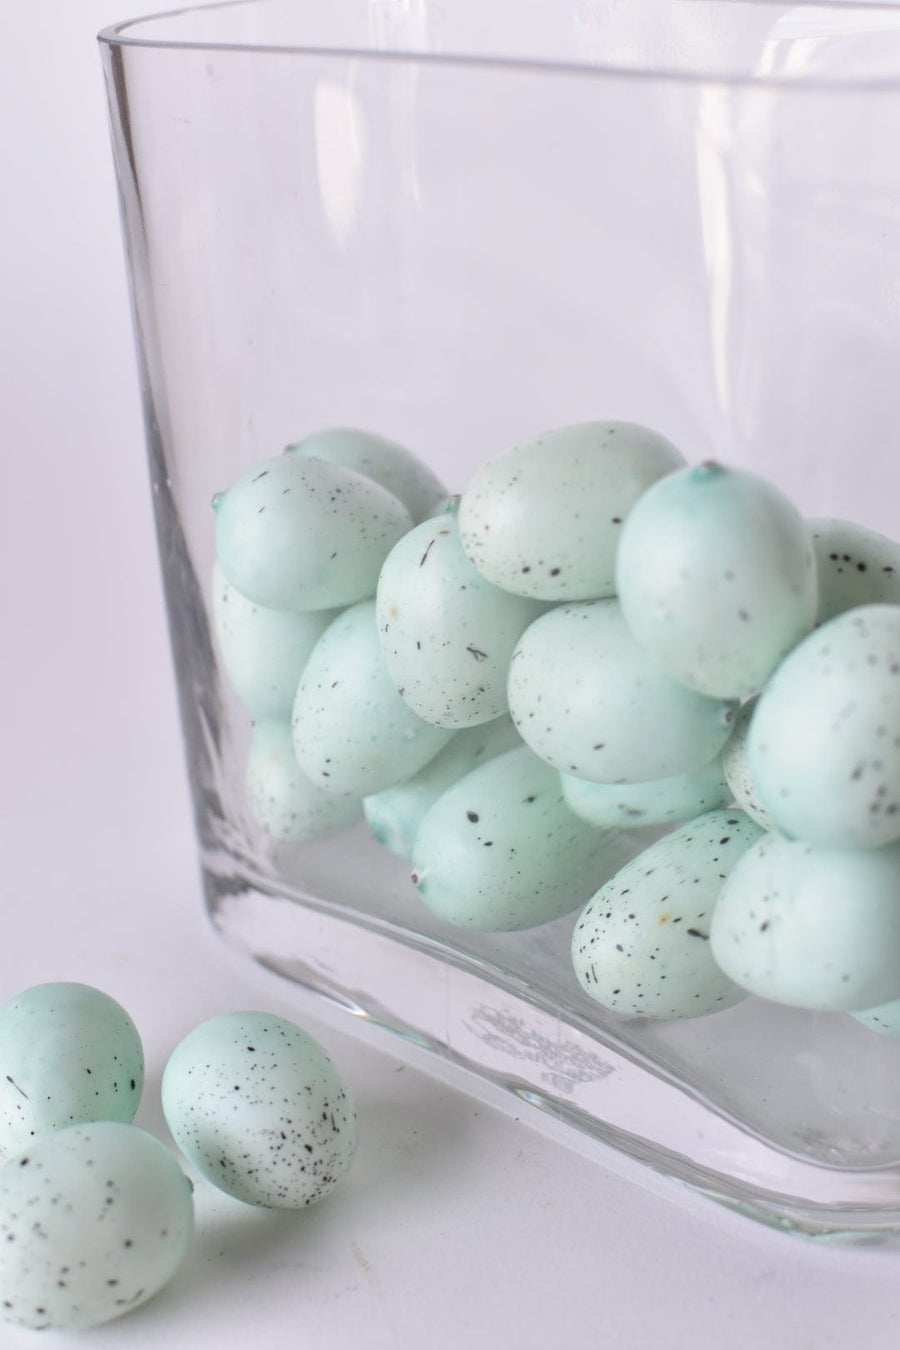 1.25" Faux Light Blue/Green Eggs With Speckles (24 eggs)